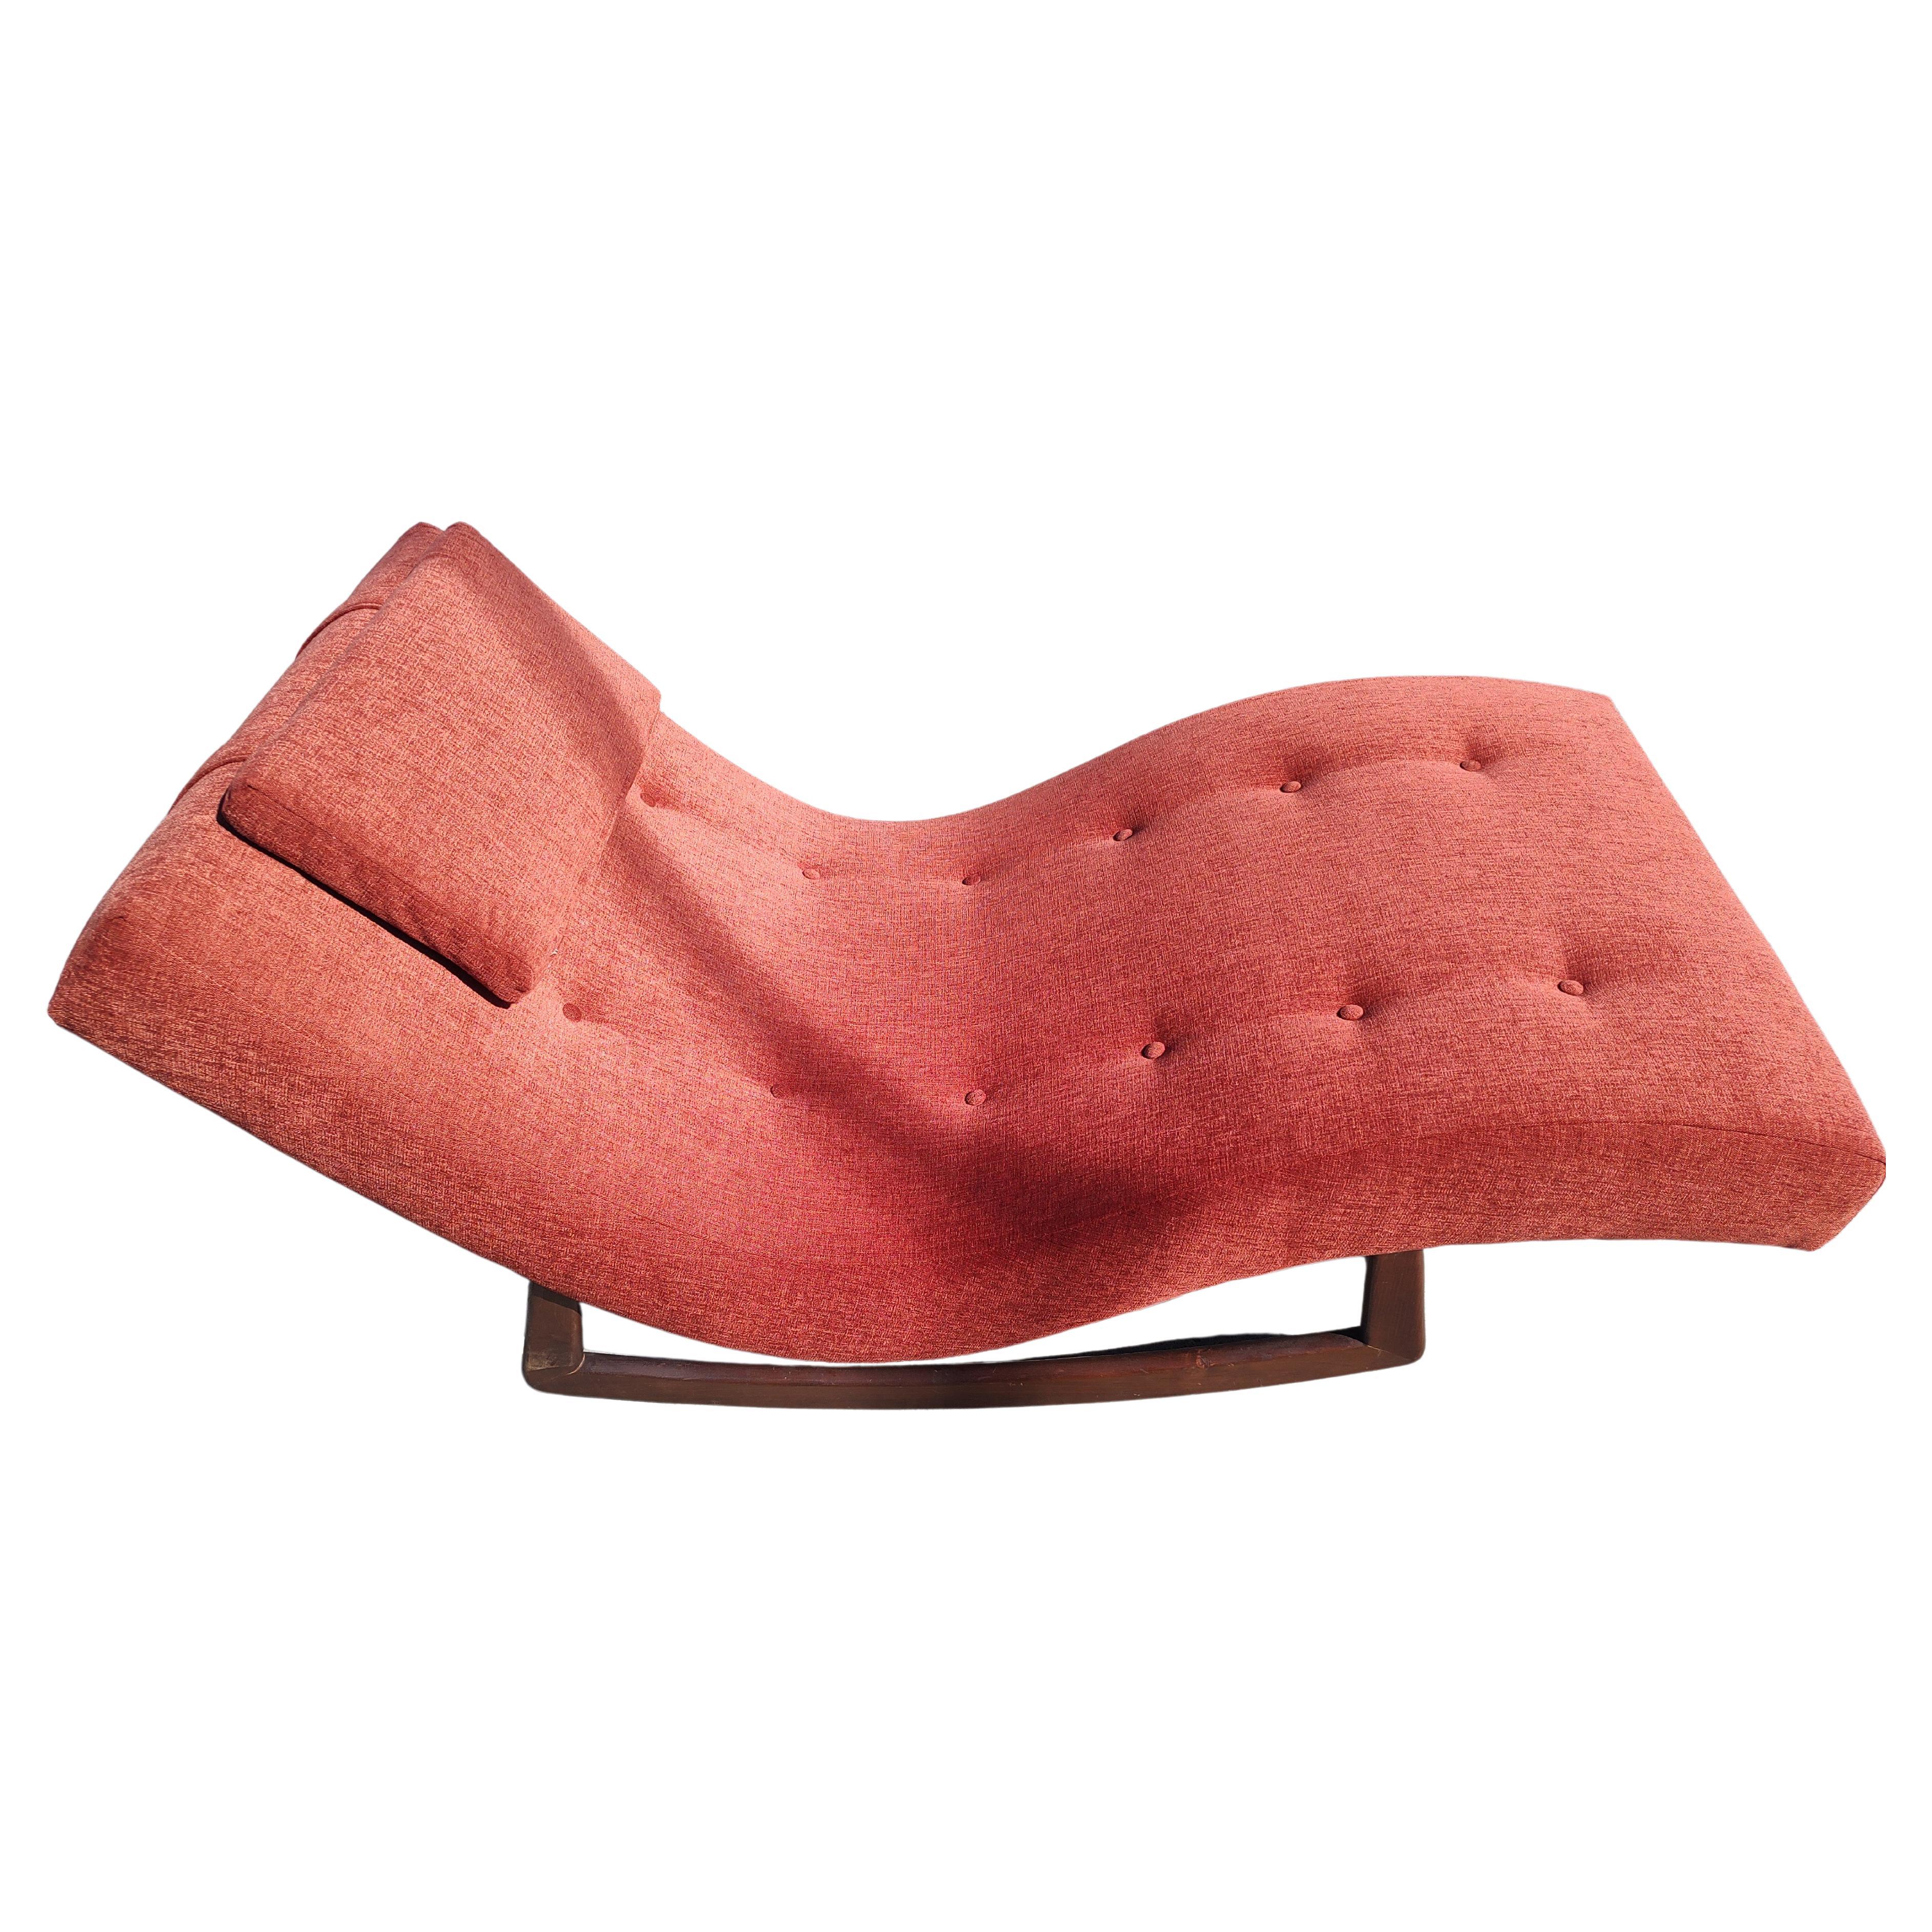 Mid-Century Modern Mid Century Modern Sculptural Wave Chaise Lounge Rocker by Adrian Pearsall C1960 For Sale